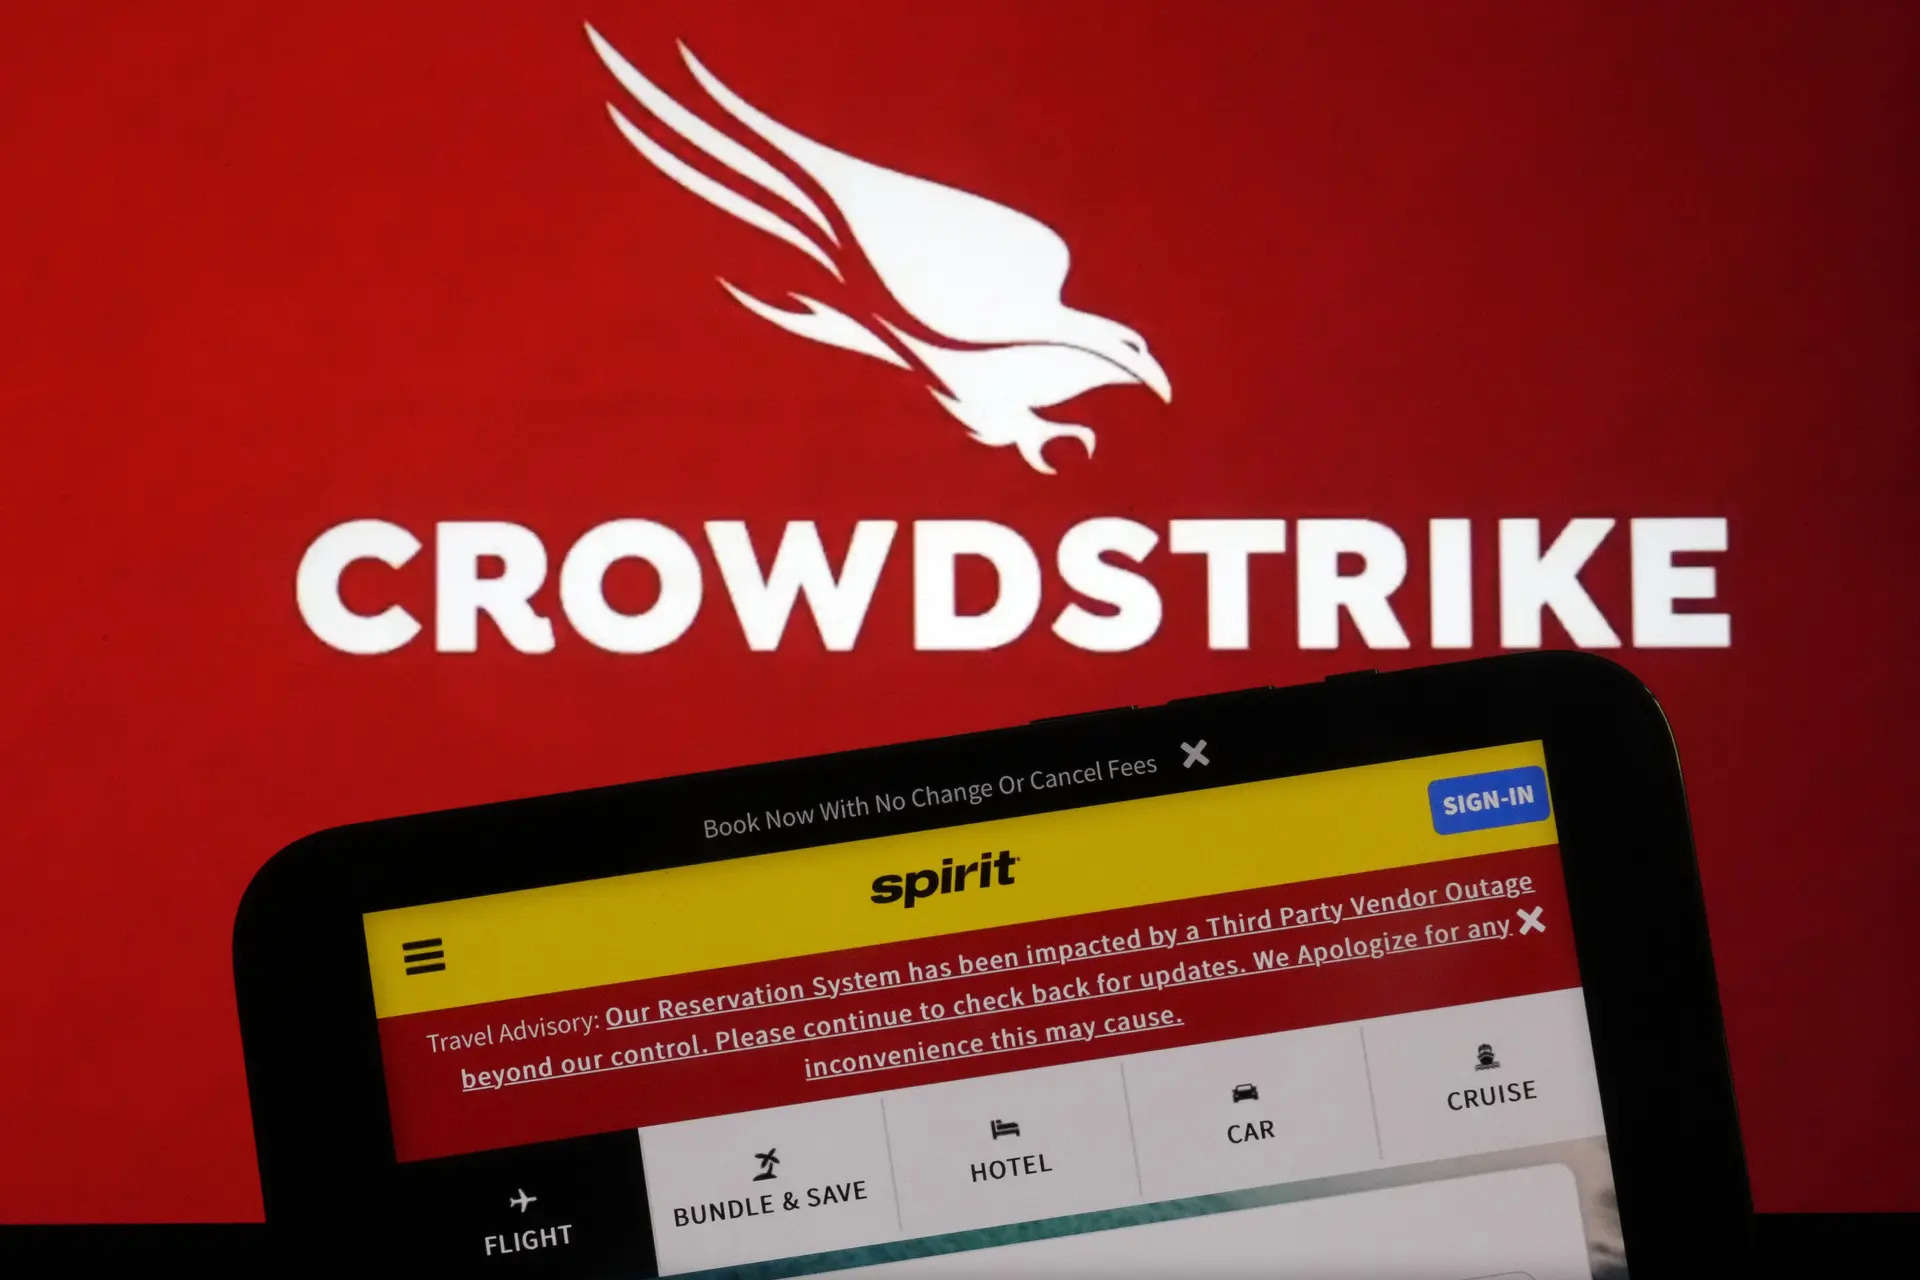 Insured losses from CrowdStrike outage could reach $1.5 billion: CyberCube 